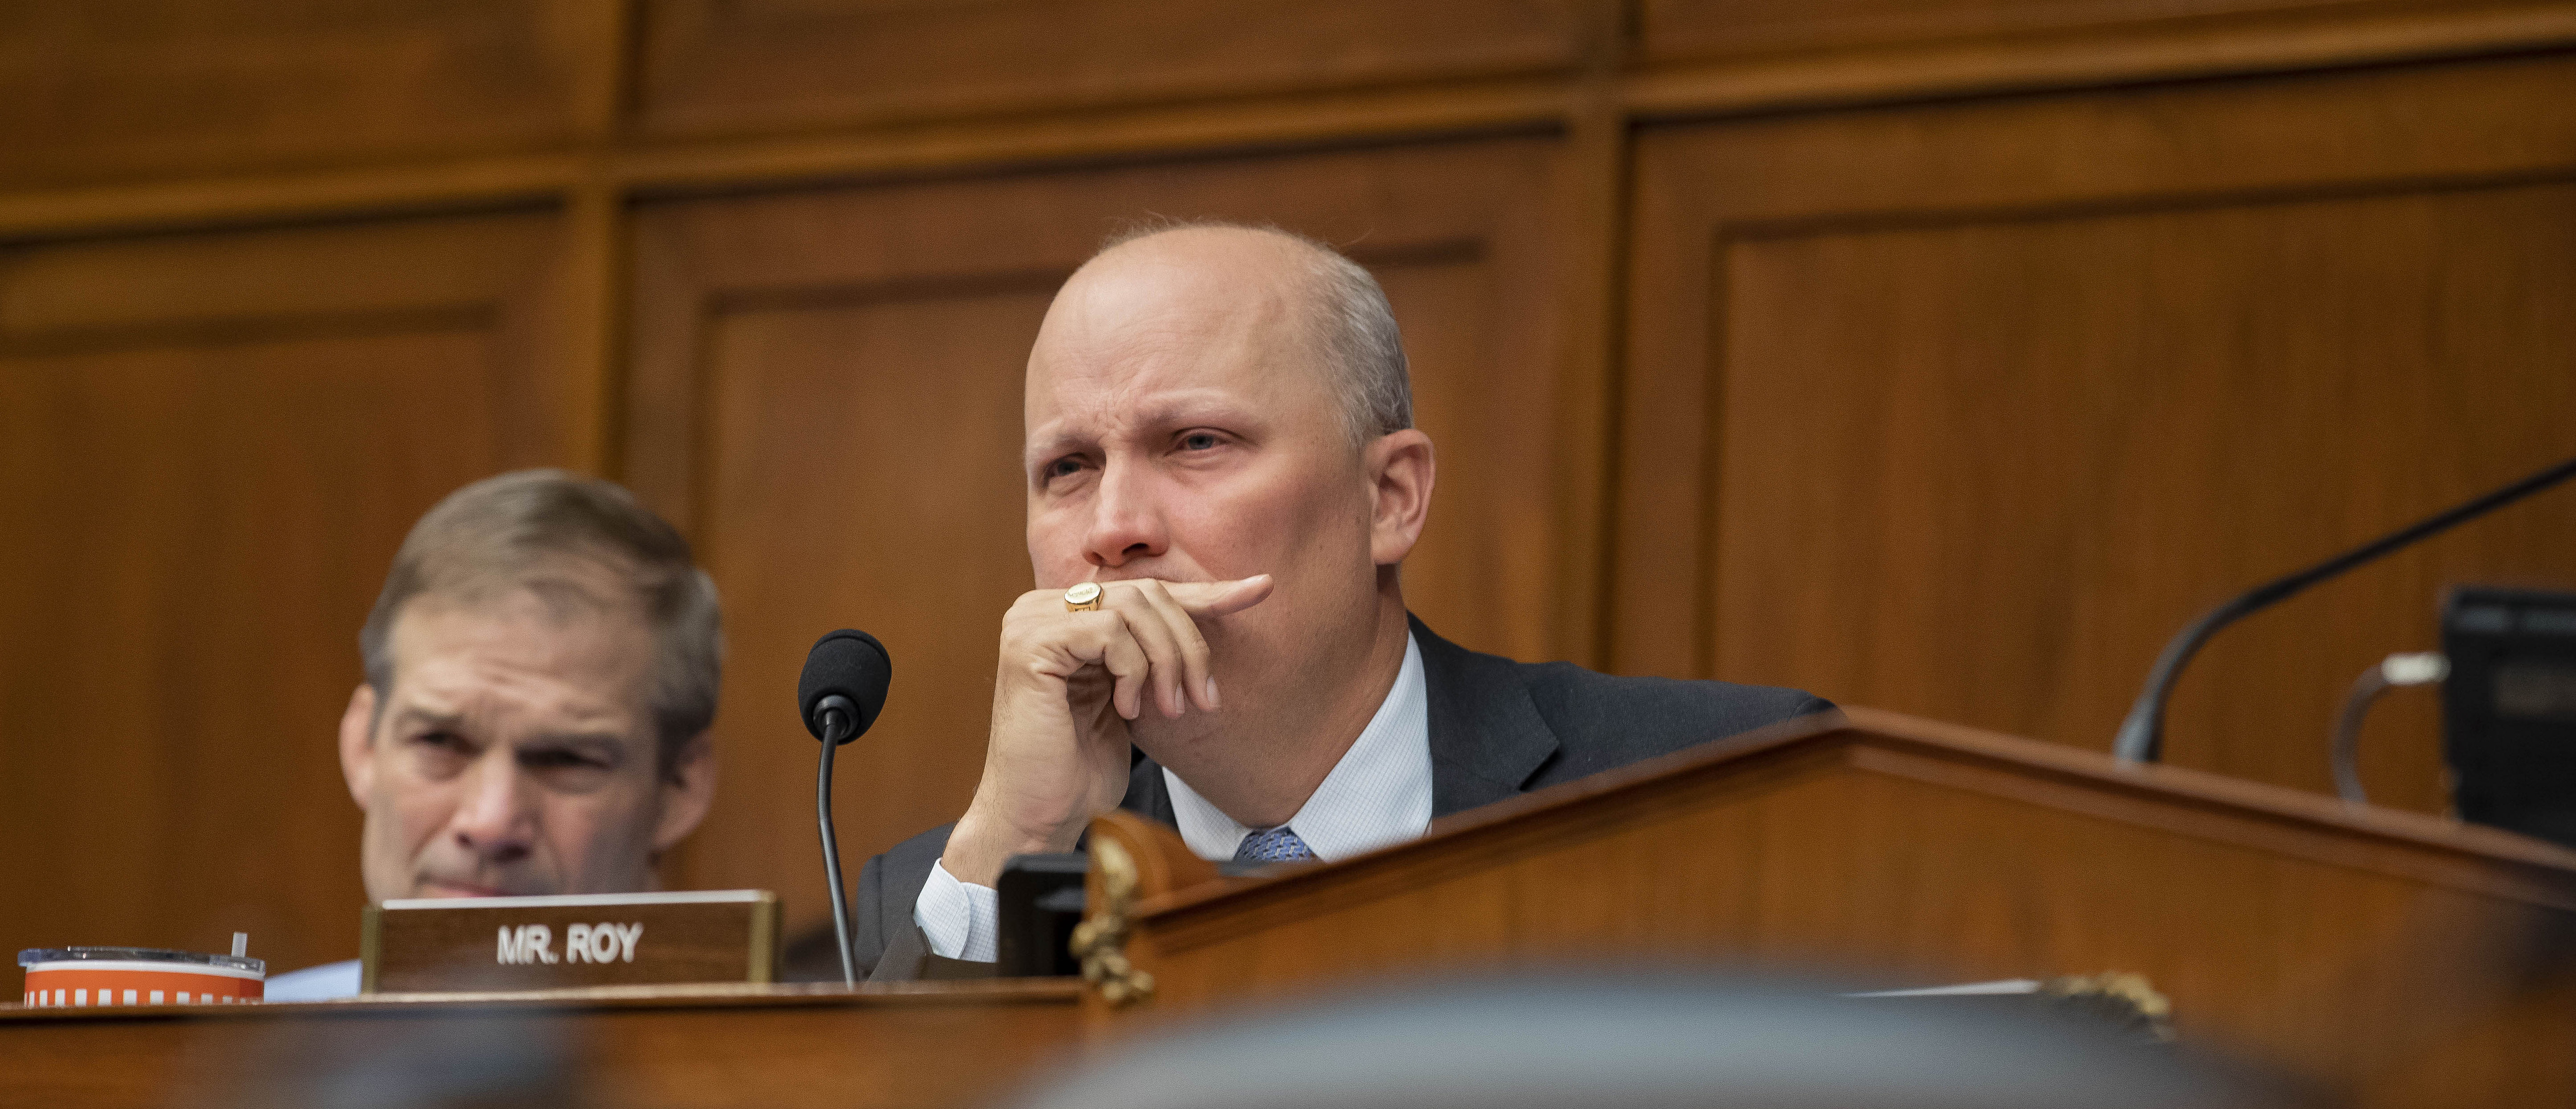 U.S. Rep. Chip Roy listens during a House Civil Rights and Civil Liberties Subcommittee hearing on confronting white supremacy at the U.S. Capitol on May 15, 2019 in Washington, D.C. (Anna Moneymaker/Getty Images)